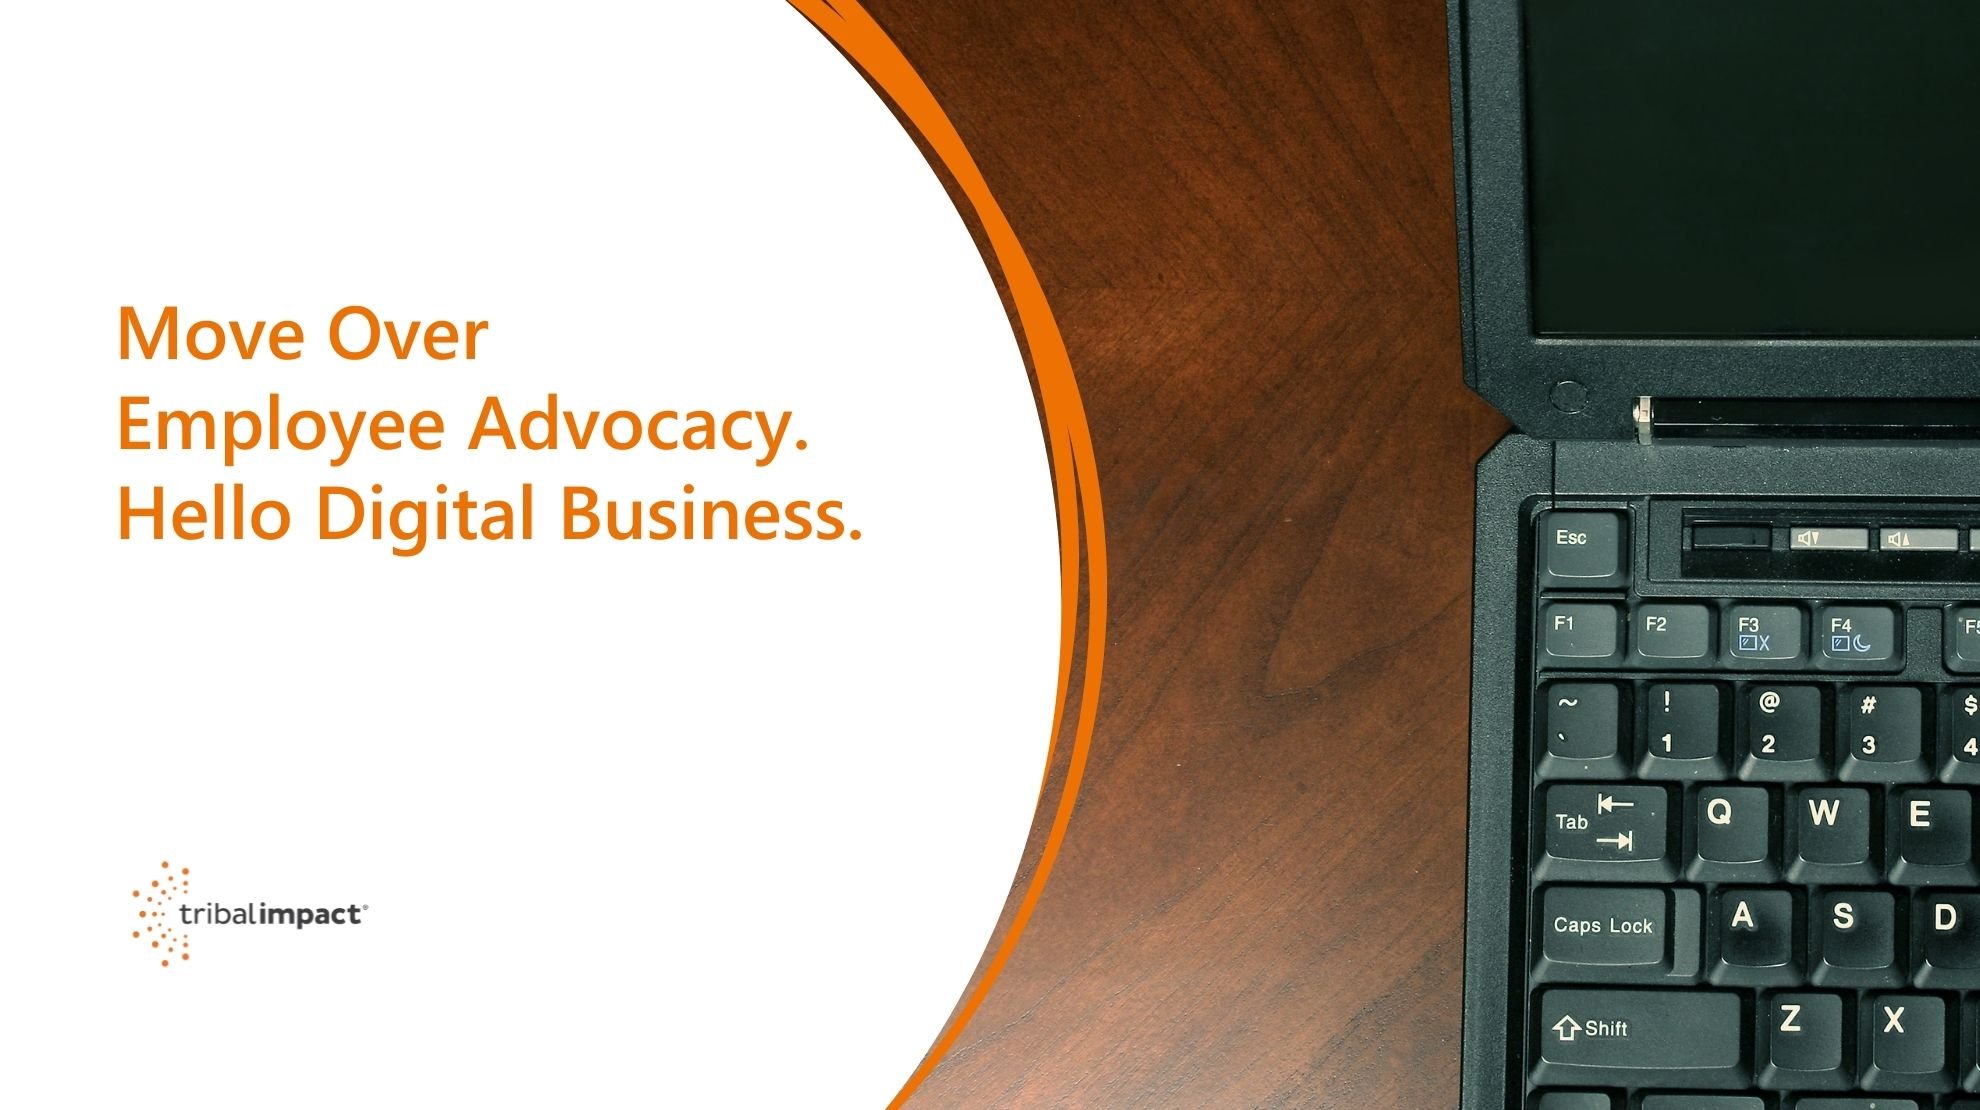 Move Over Employee Advocacy Hello Digital Business Blog Post